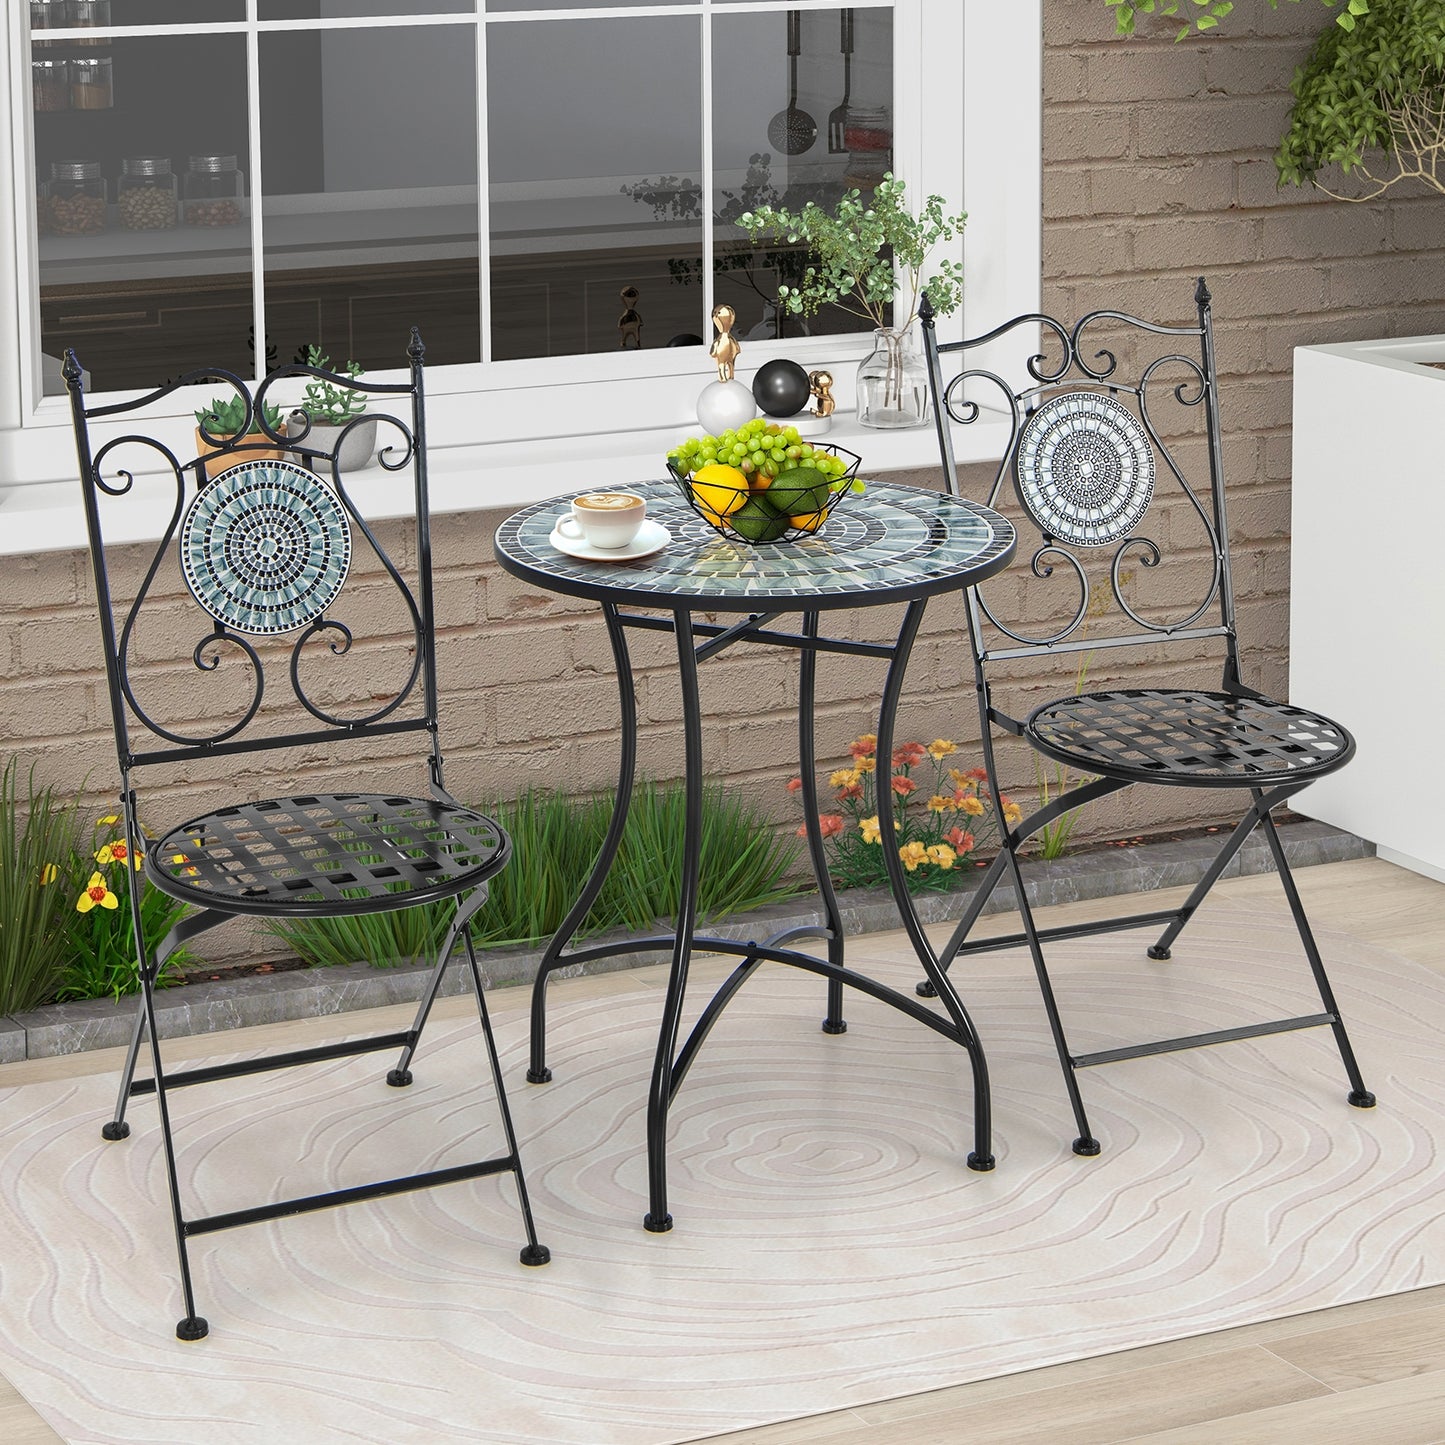 Set of 2 Mosaic Chairs for Patio Metal Folding Chairs-B